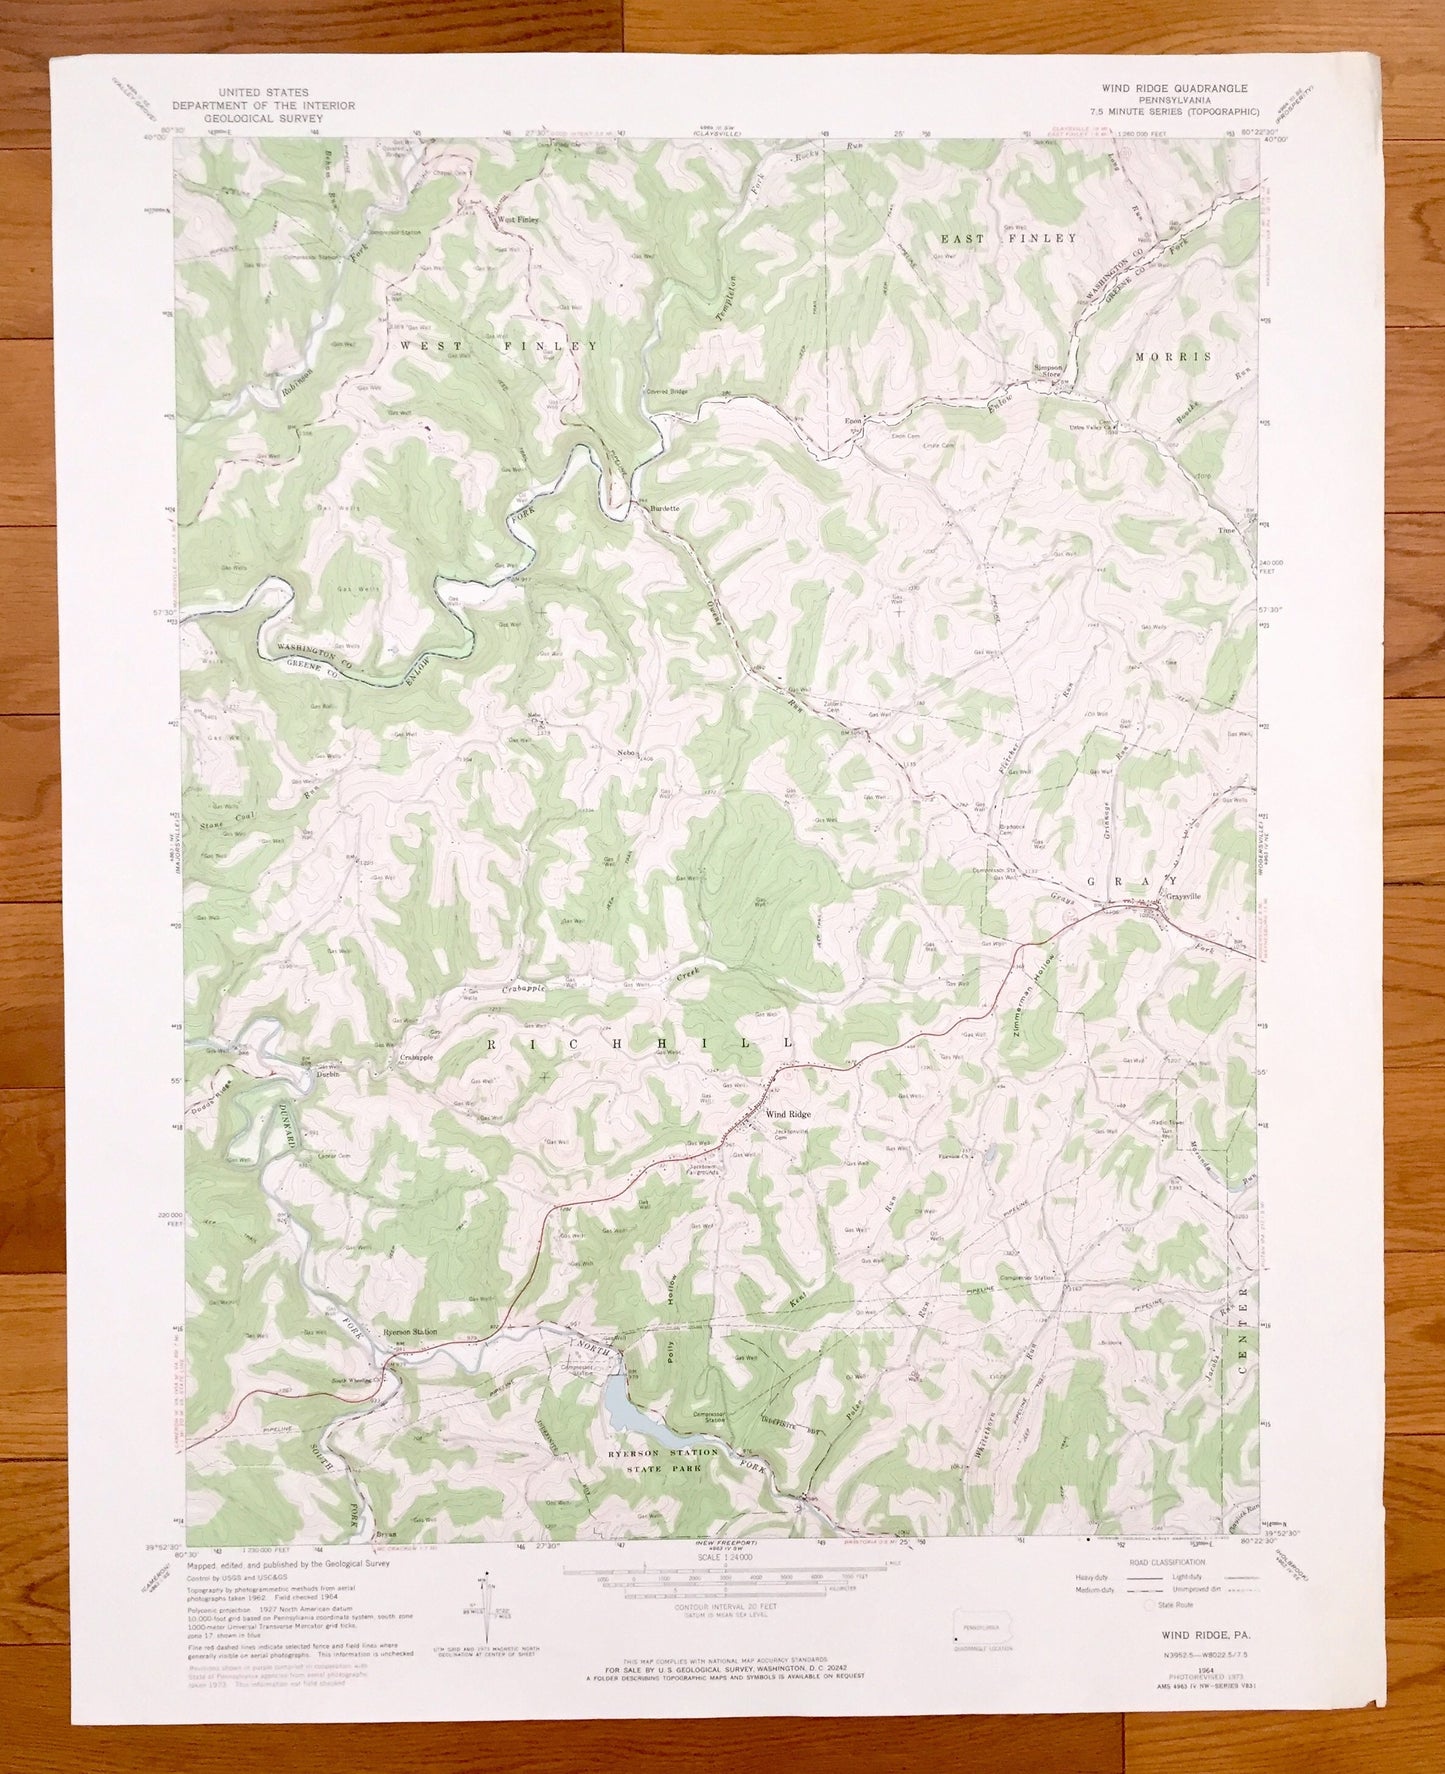 Antique Wind Ridge, Pennsylvania 1964 US Geological Survey Topographic Map – Greene County, Washington County, West Finley, Rich Hill, Gray